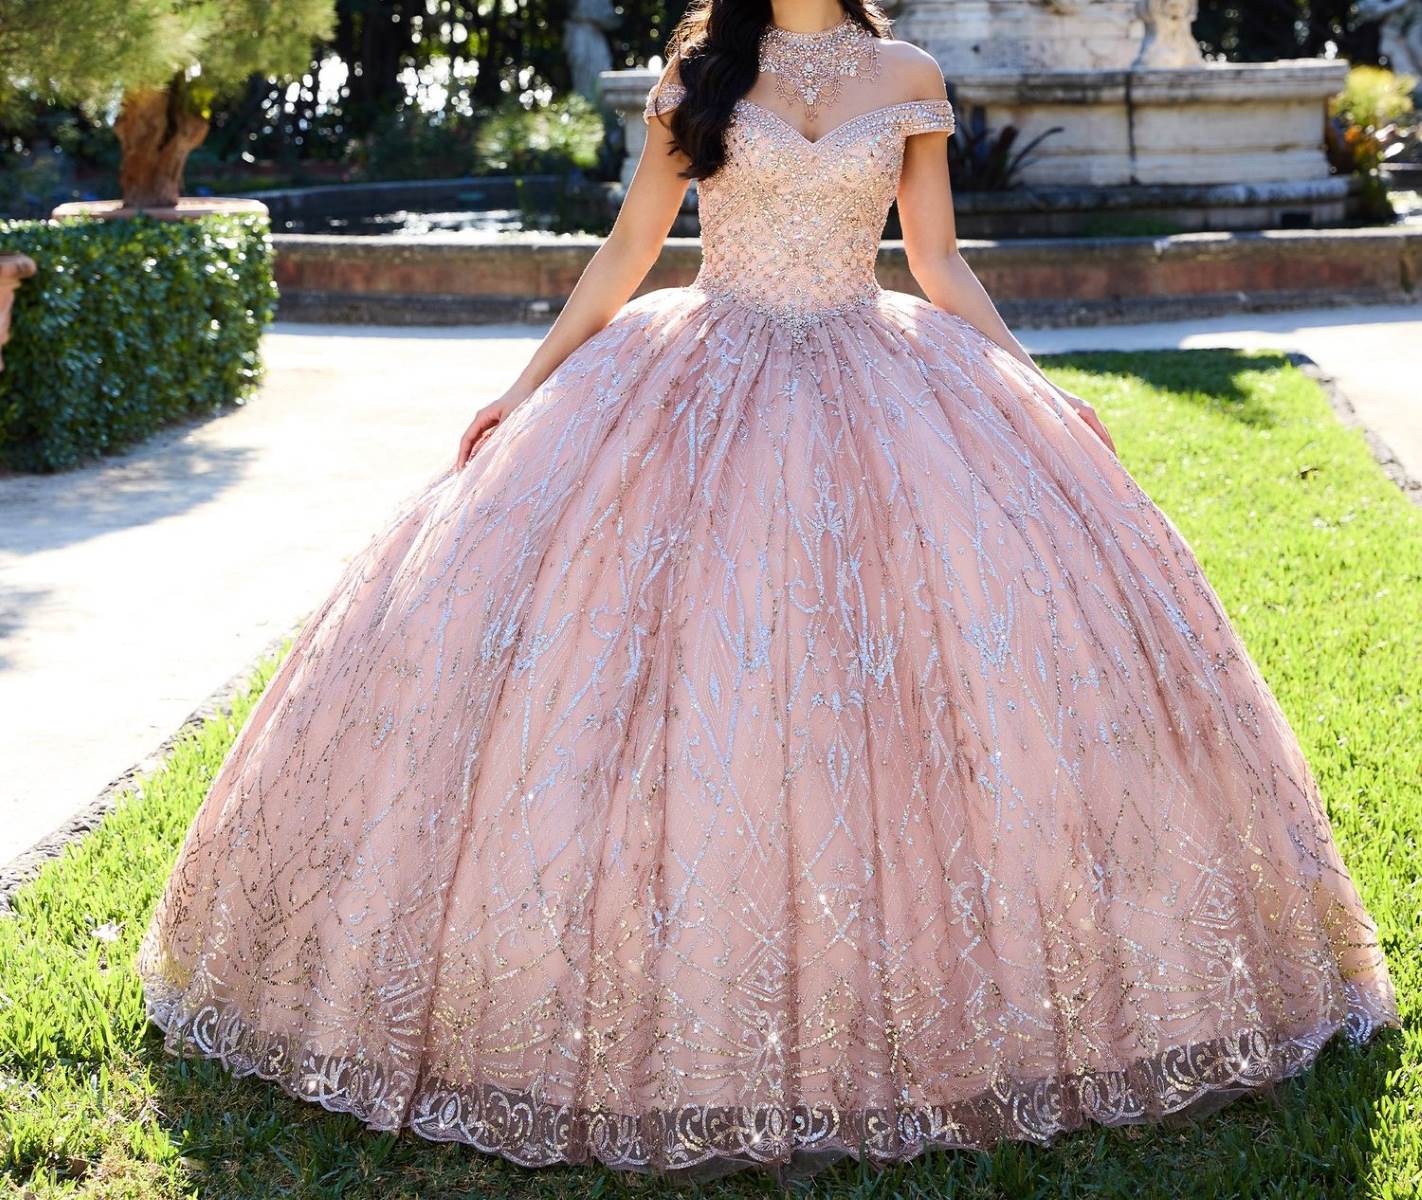 Non-Hispanic Teen's Bold Move: Renting Quinceañera Dress For Birthday Photos - Is It Rude?